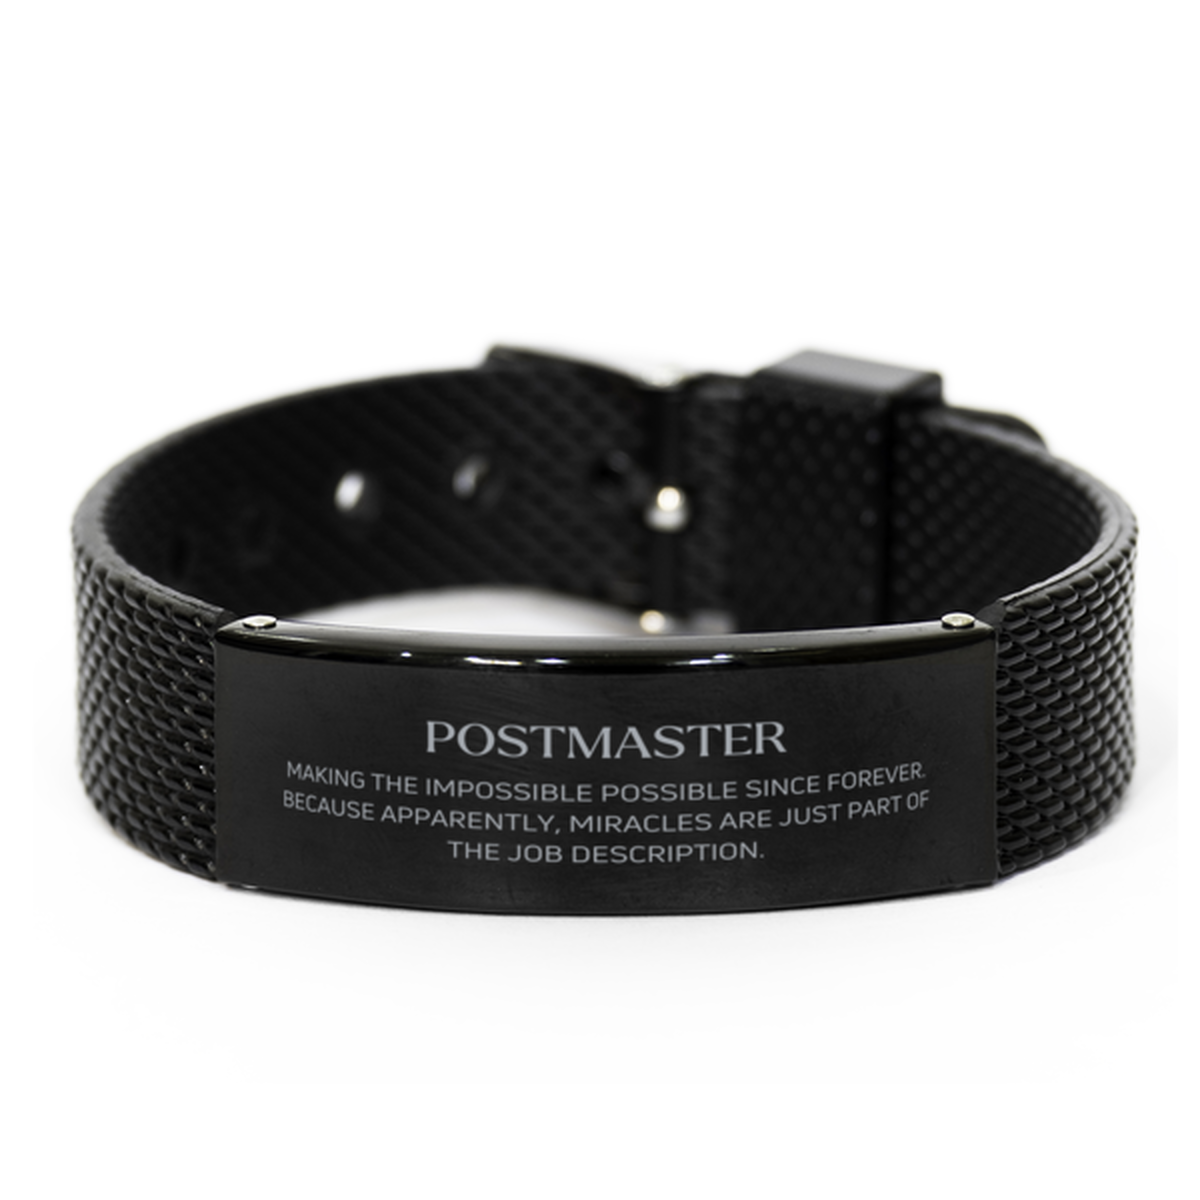 Funny Postmaster Gifts, Miracles are just part of the job description, Inspirational Birthday Black Shark Mesh Bracelet For Postmaster, Men, Women, Coworkers, Friends, Boss